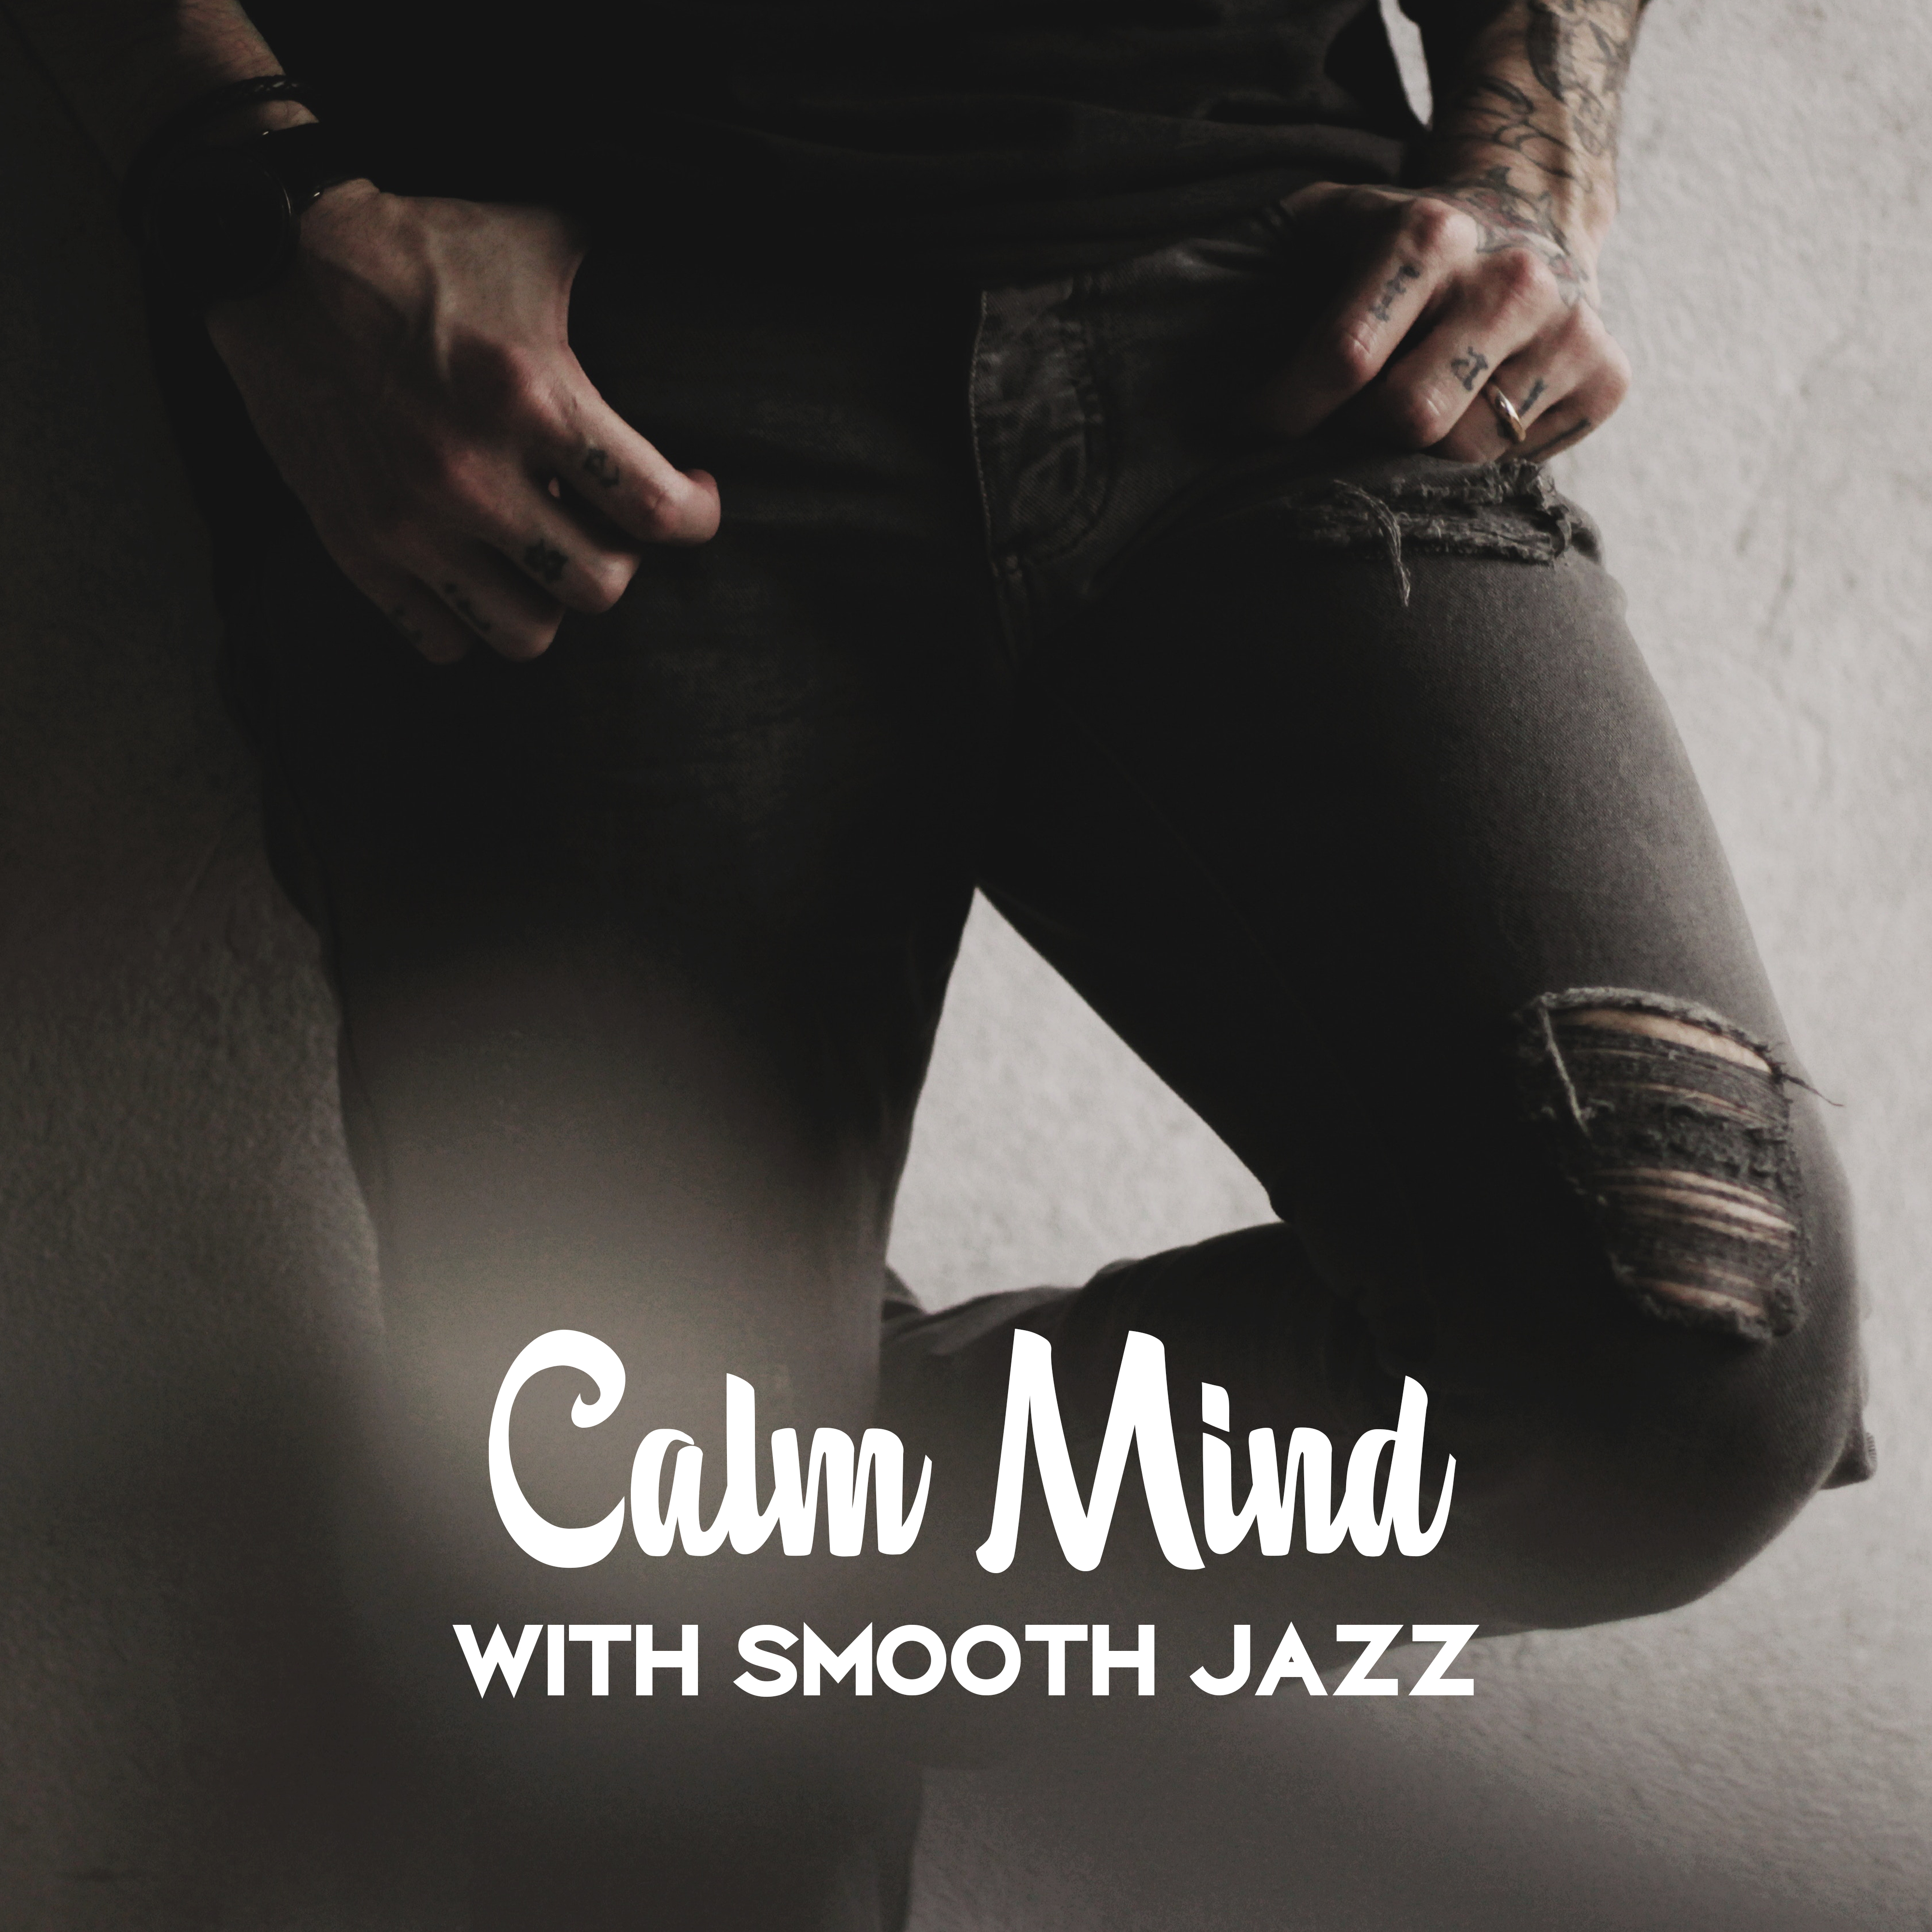 Calm Mind with Smooth Jazz  Relaxing Night Jazz Sounds, Peaceful Melodies to Calm Down, Stress Relief